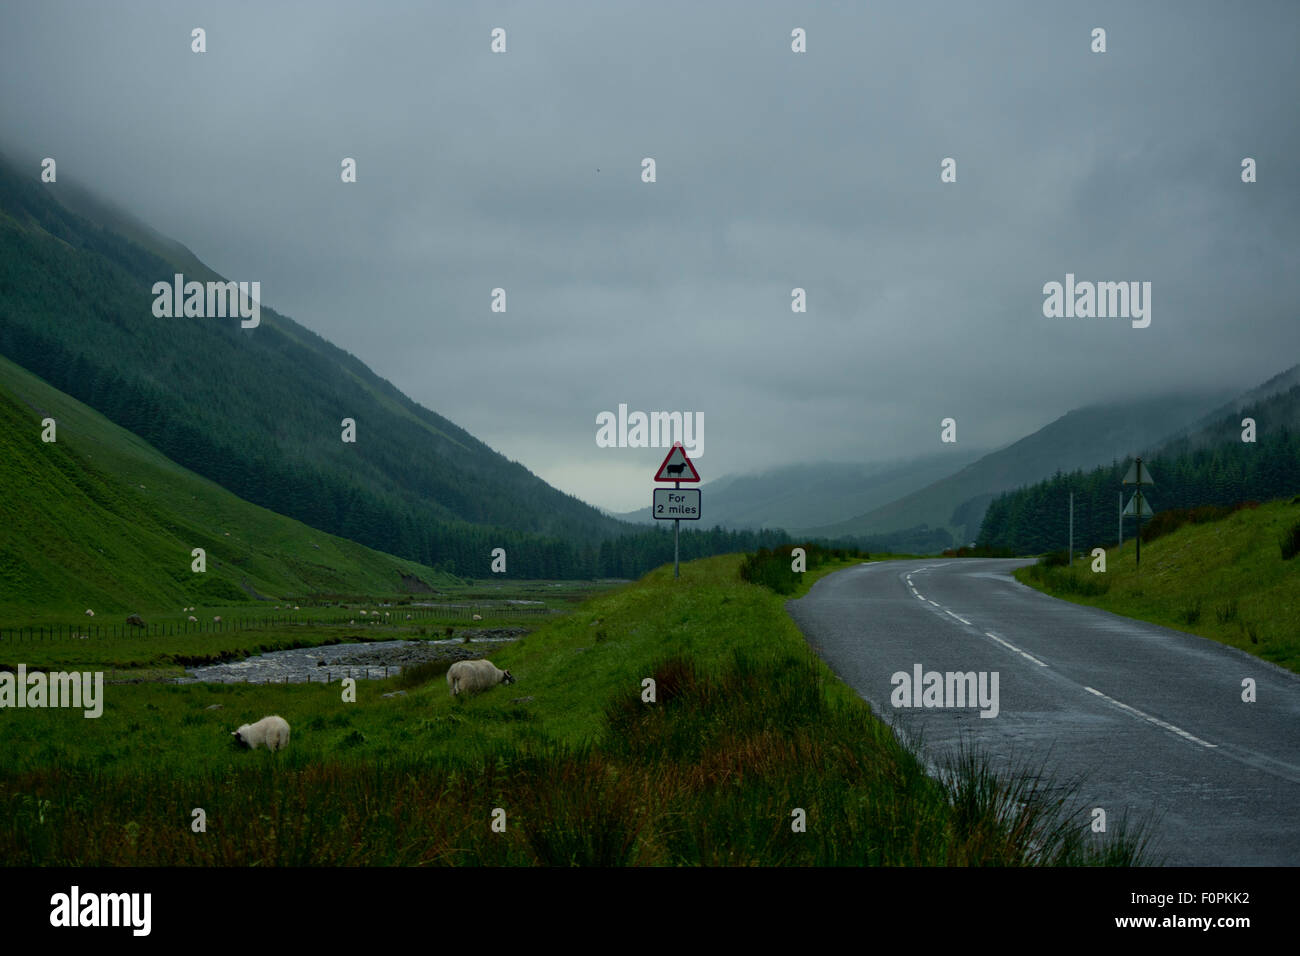 A foggy landscape of the road to Moffat in Scotland with sheep, hills,wild grass and signs. Stock Photo